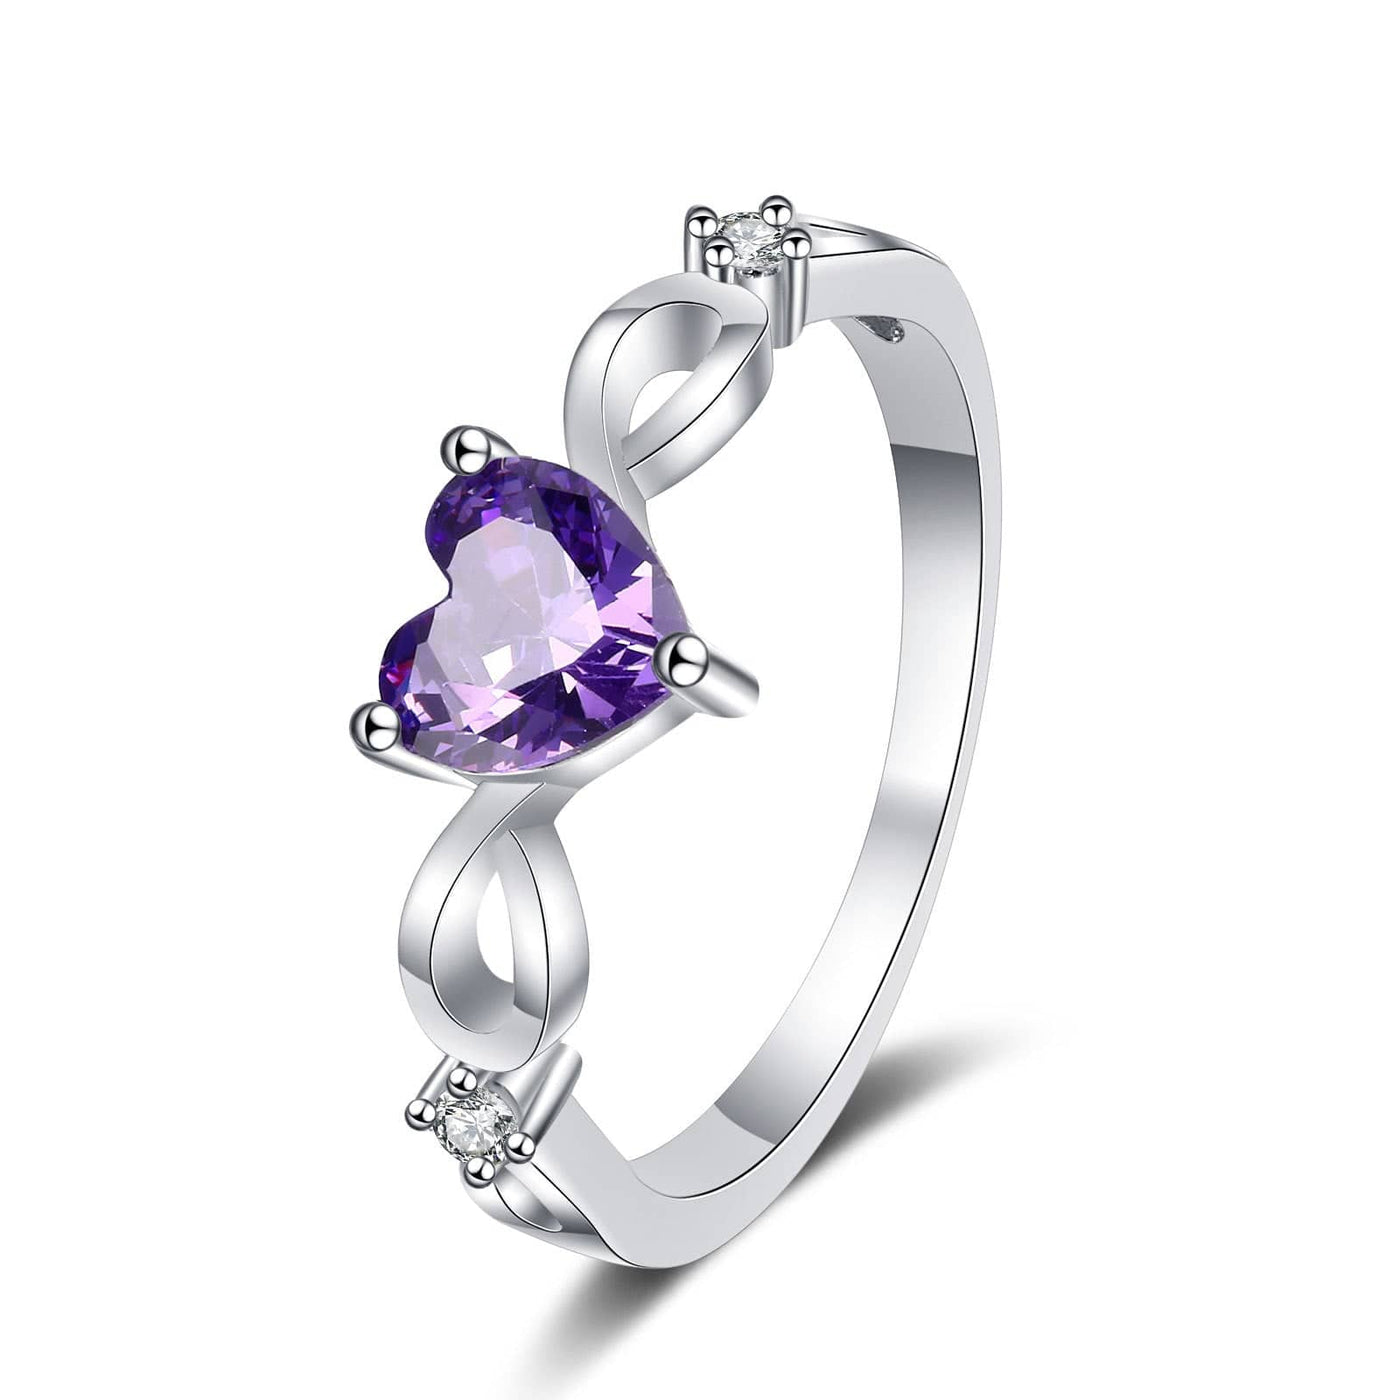 Ring - Women's S925 Sterling Silver Natural Amethyst Heart Gemstone Ring